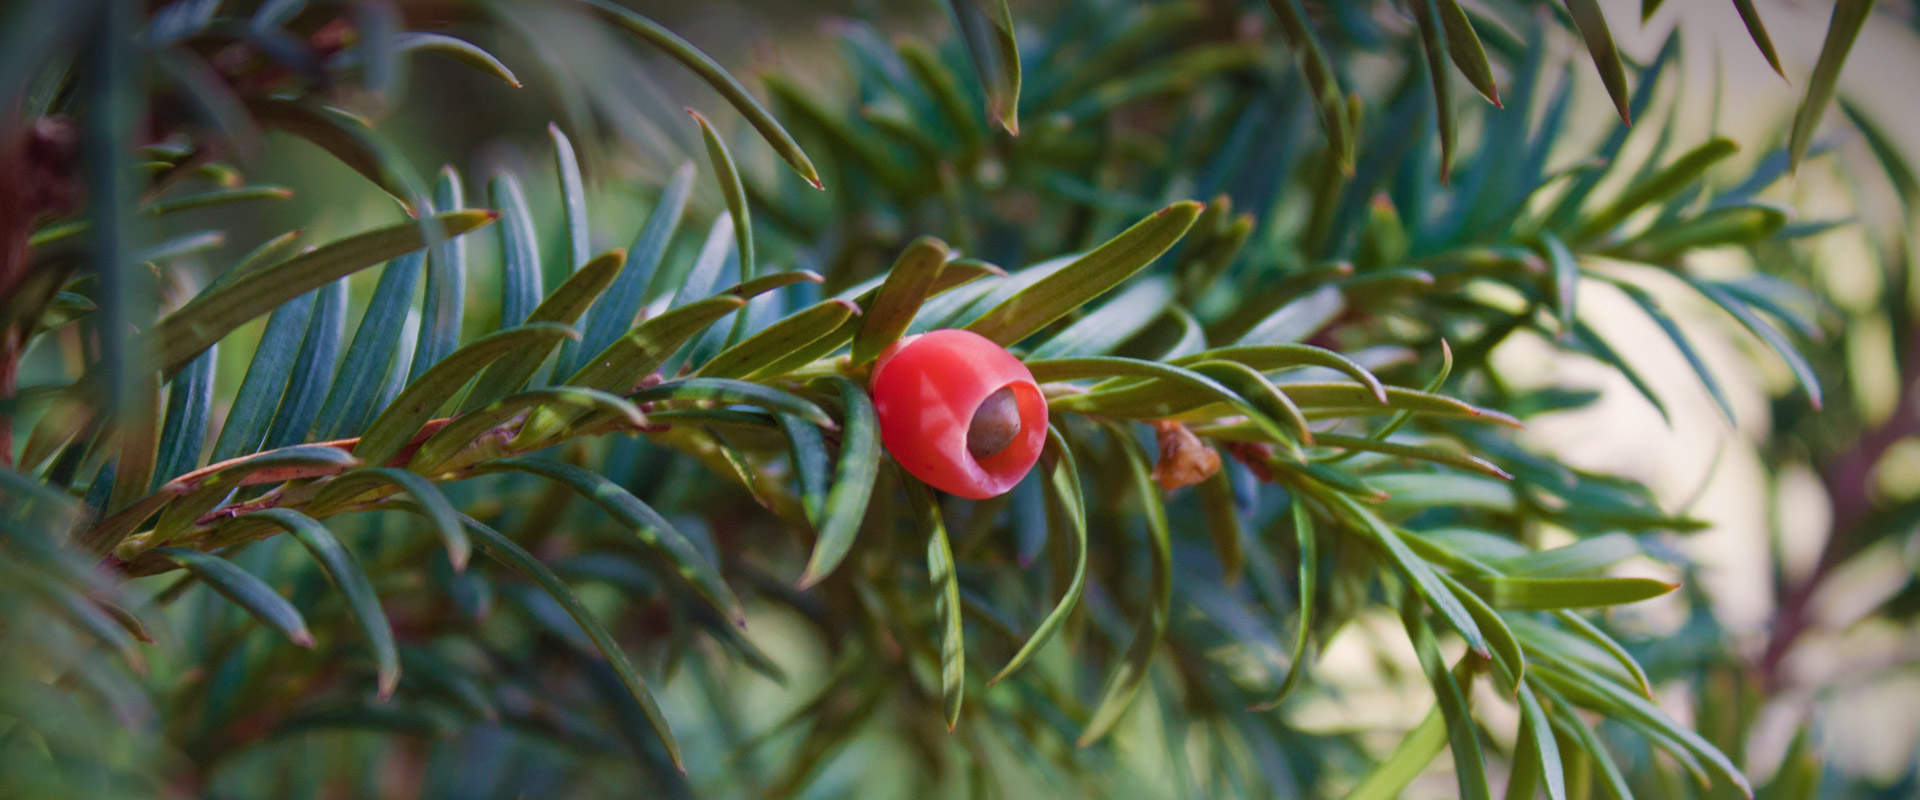 Fruit of the yew (taxus baccata)